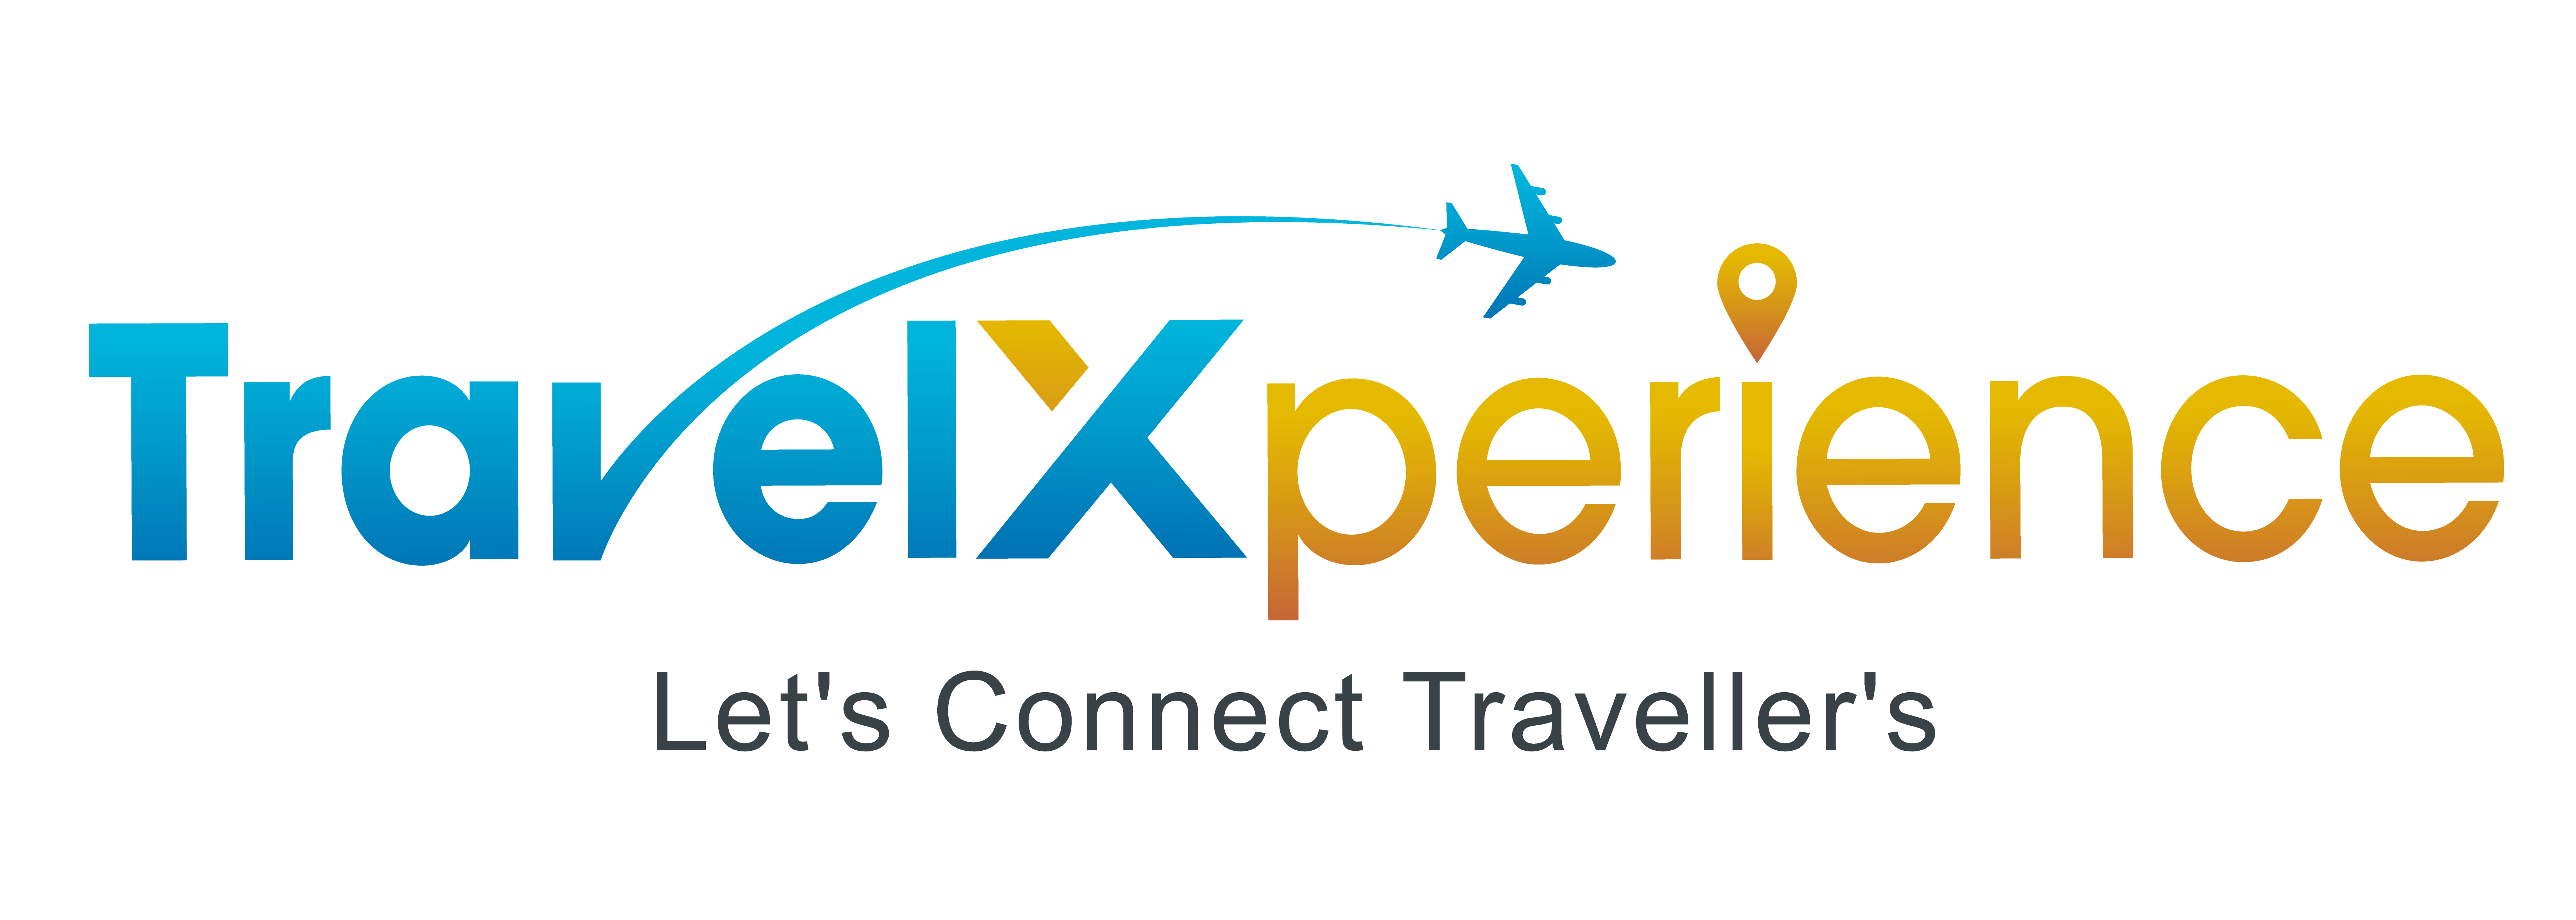 travelxperiance